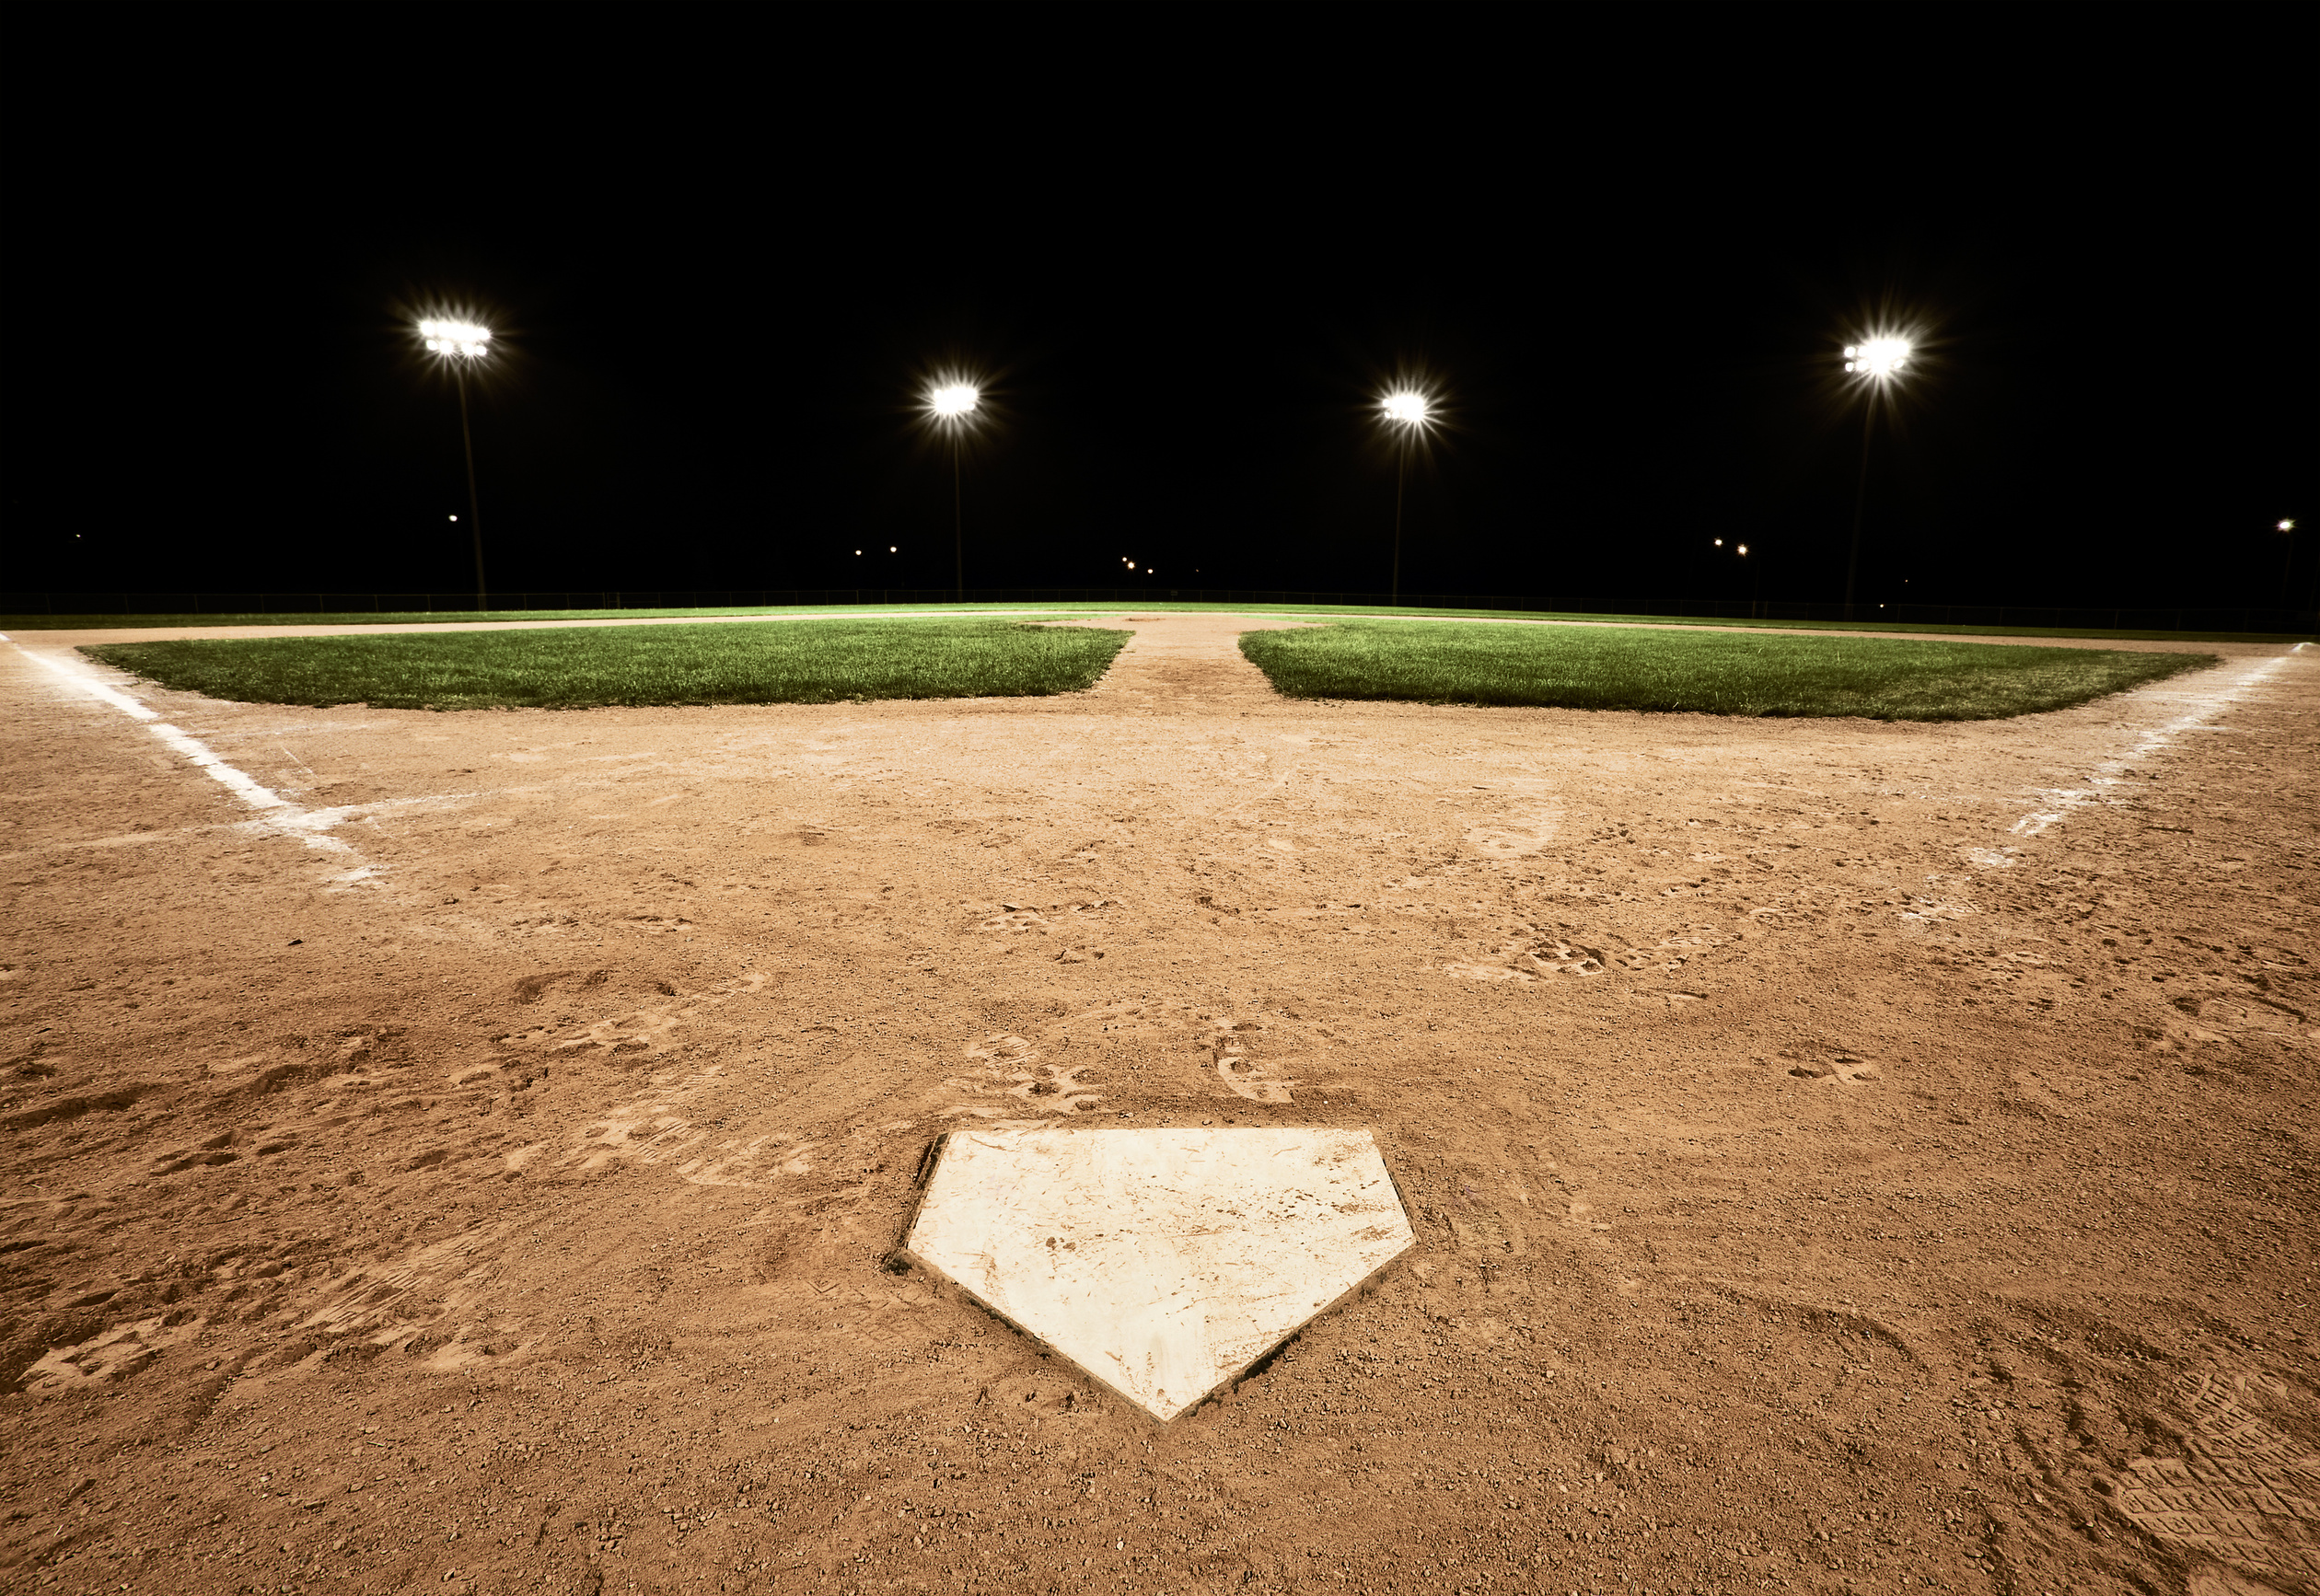 A picture of a diamond on a baseball field